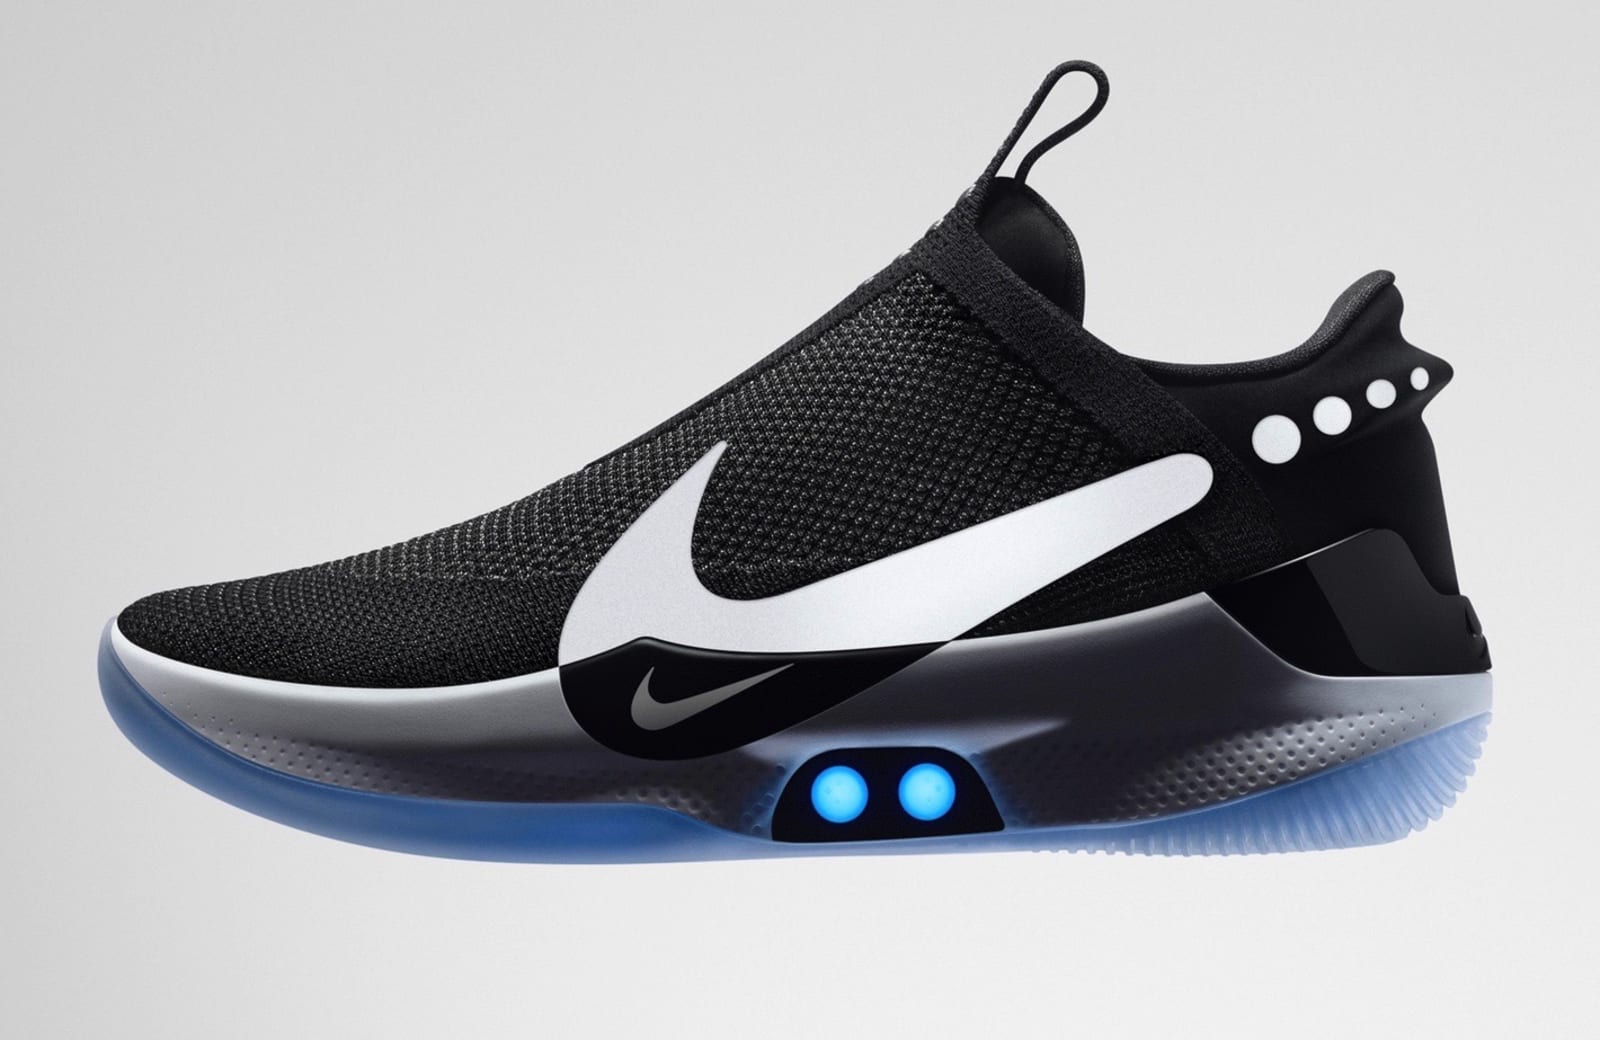 Nike's Adapt BB is an app-controlled, self-lacing basketball shoe ...